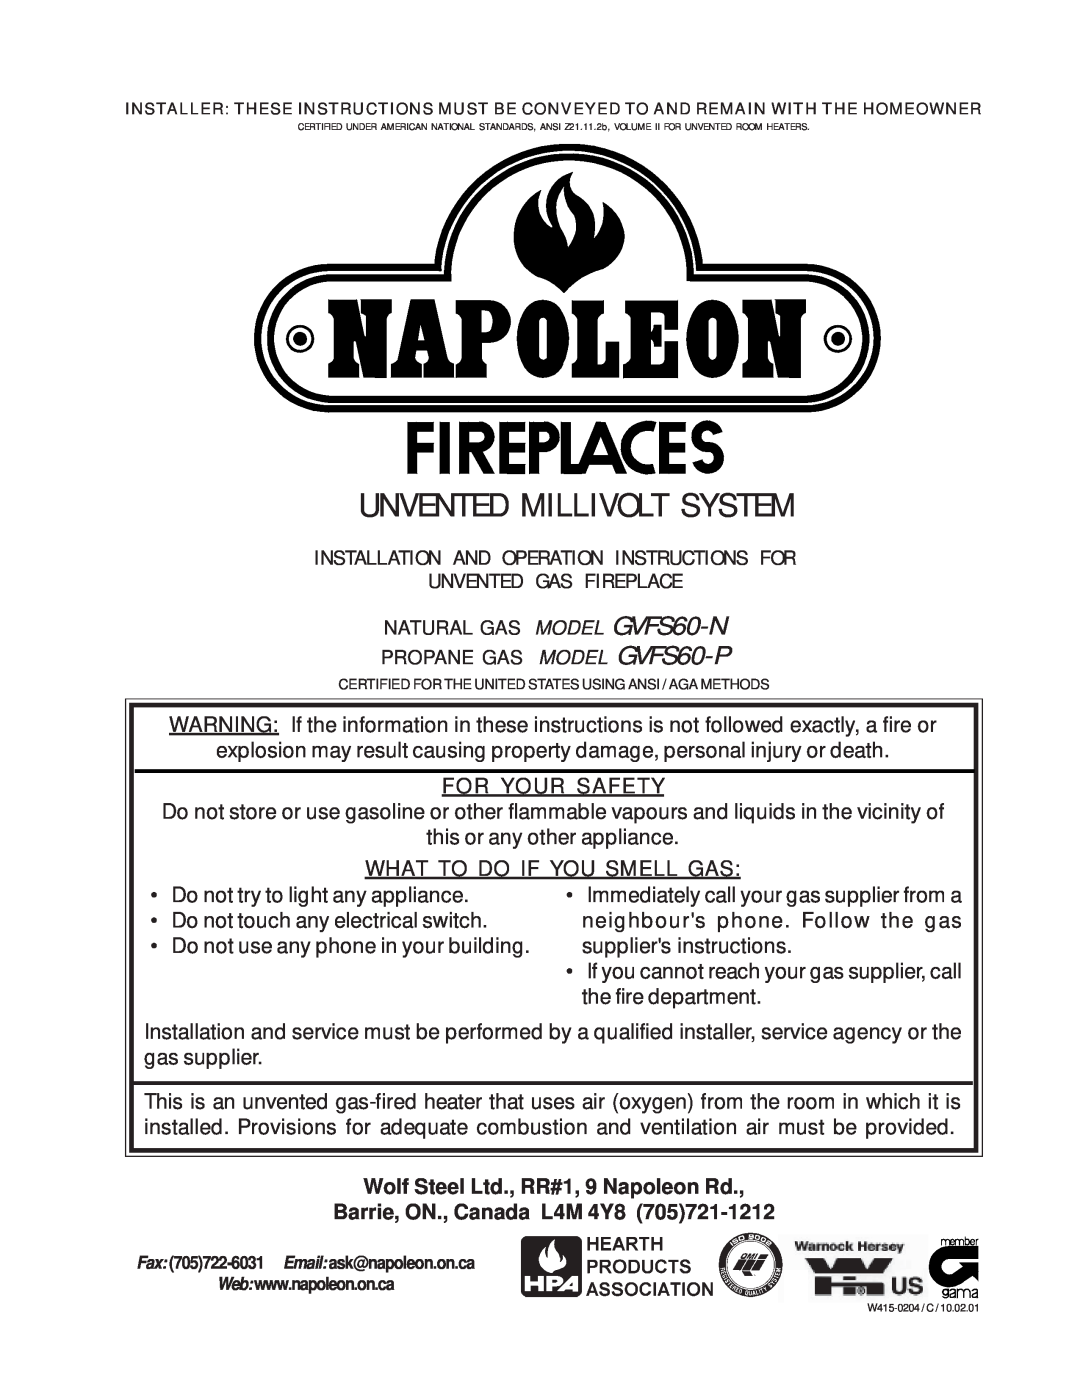 Napoleon Fireplaces GVFS60-P, GVFS60-N manual Unvented Millivolt System, For Your Safety, What To Do If You Smell Gas 